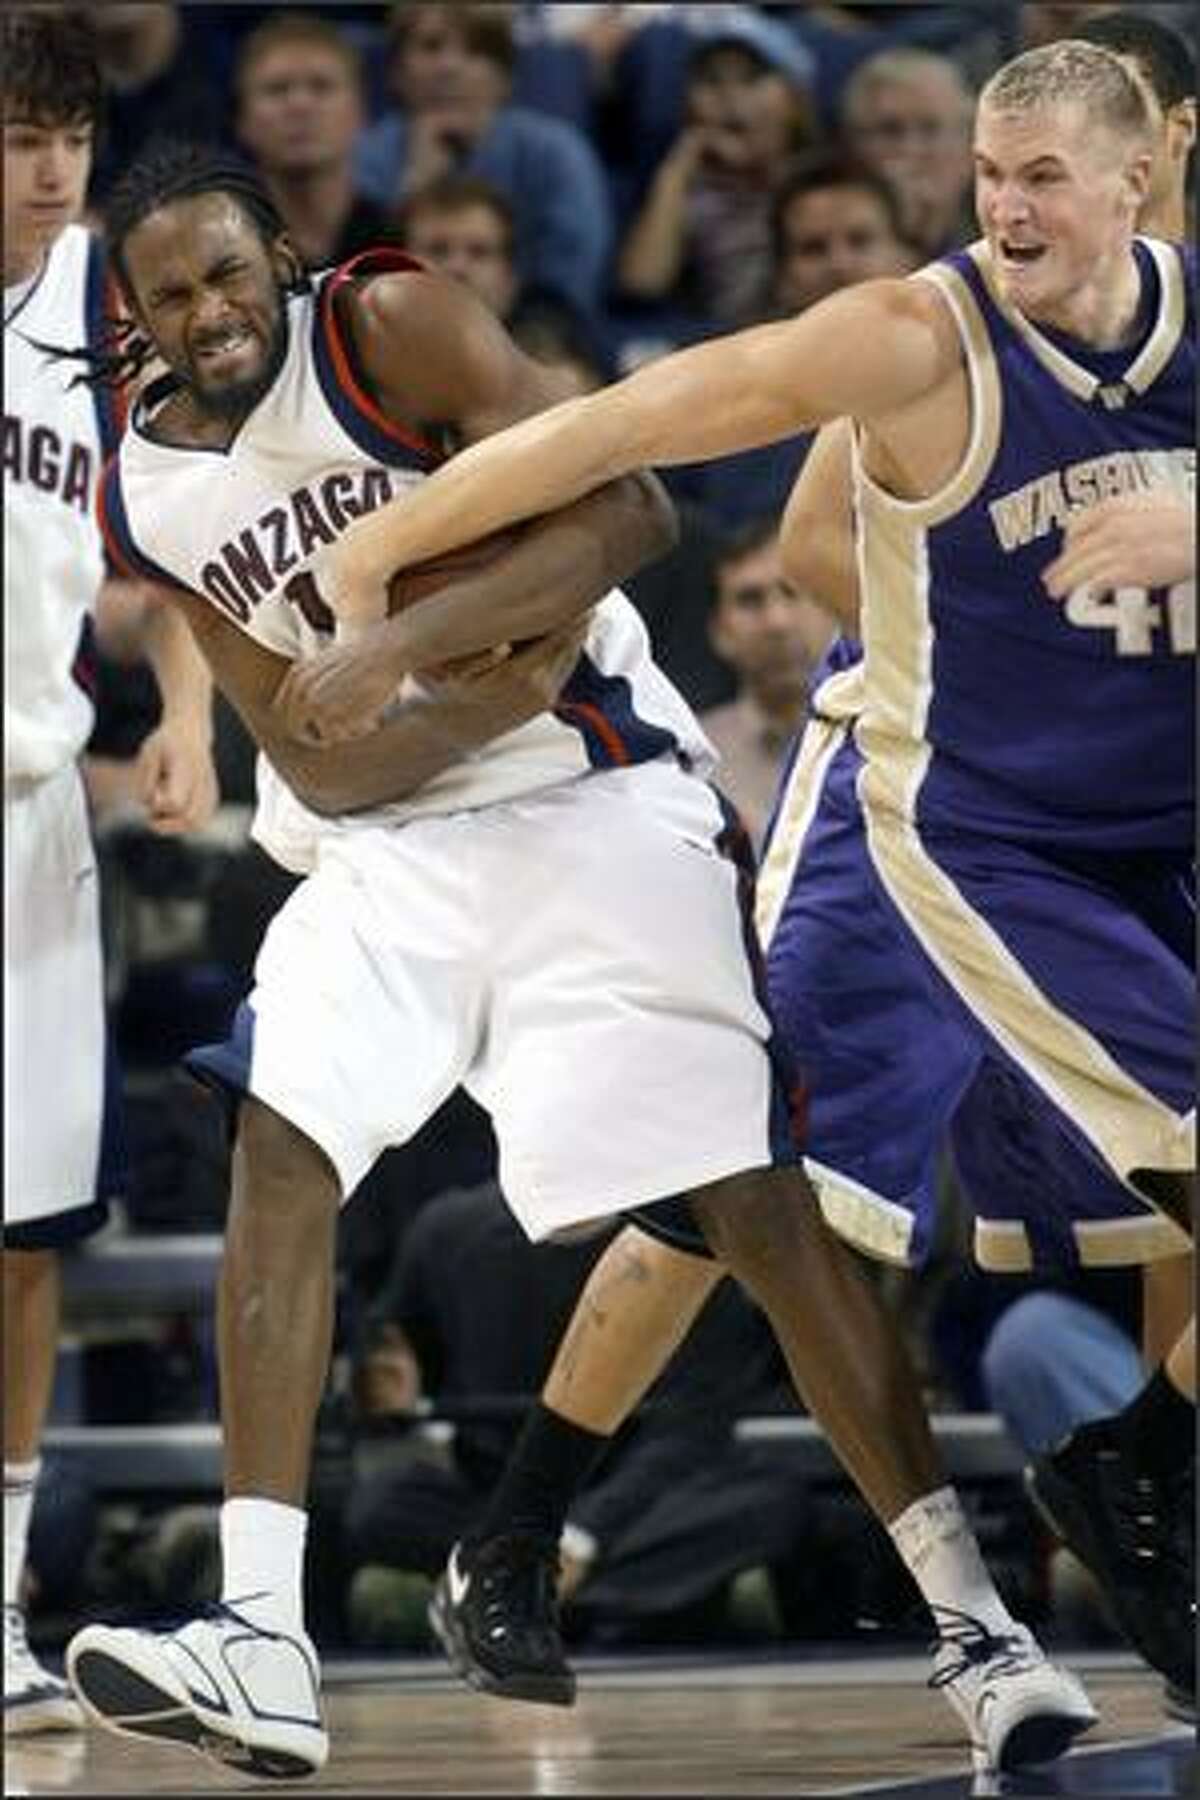 Gonzaga forward Ronny Turiaf and Washington's Mike Jensen wrestle for a rebound in the second half.